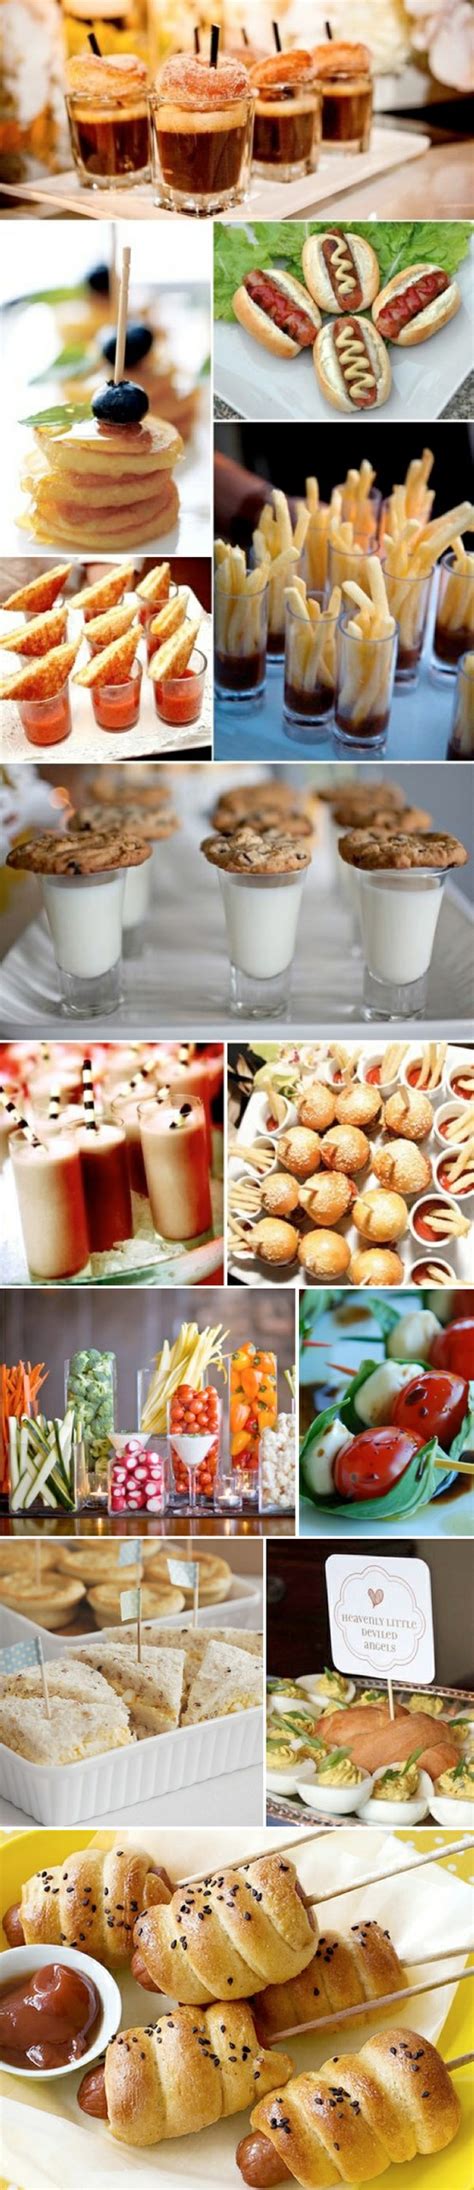 Parties, fundraisers, marketing, business functions, weddings, showers and. Finger foods for that party you've been planning (38 ...